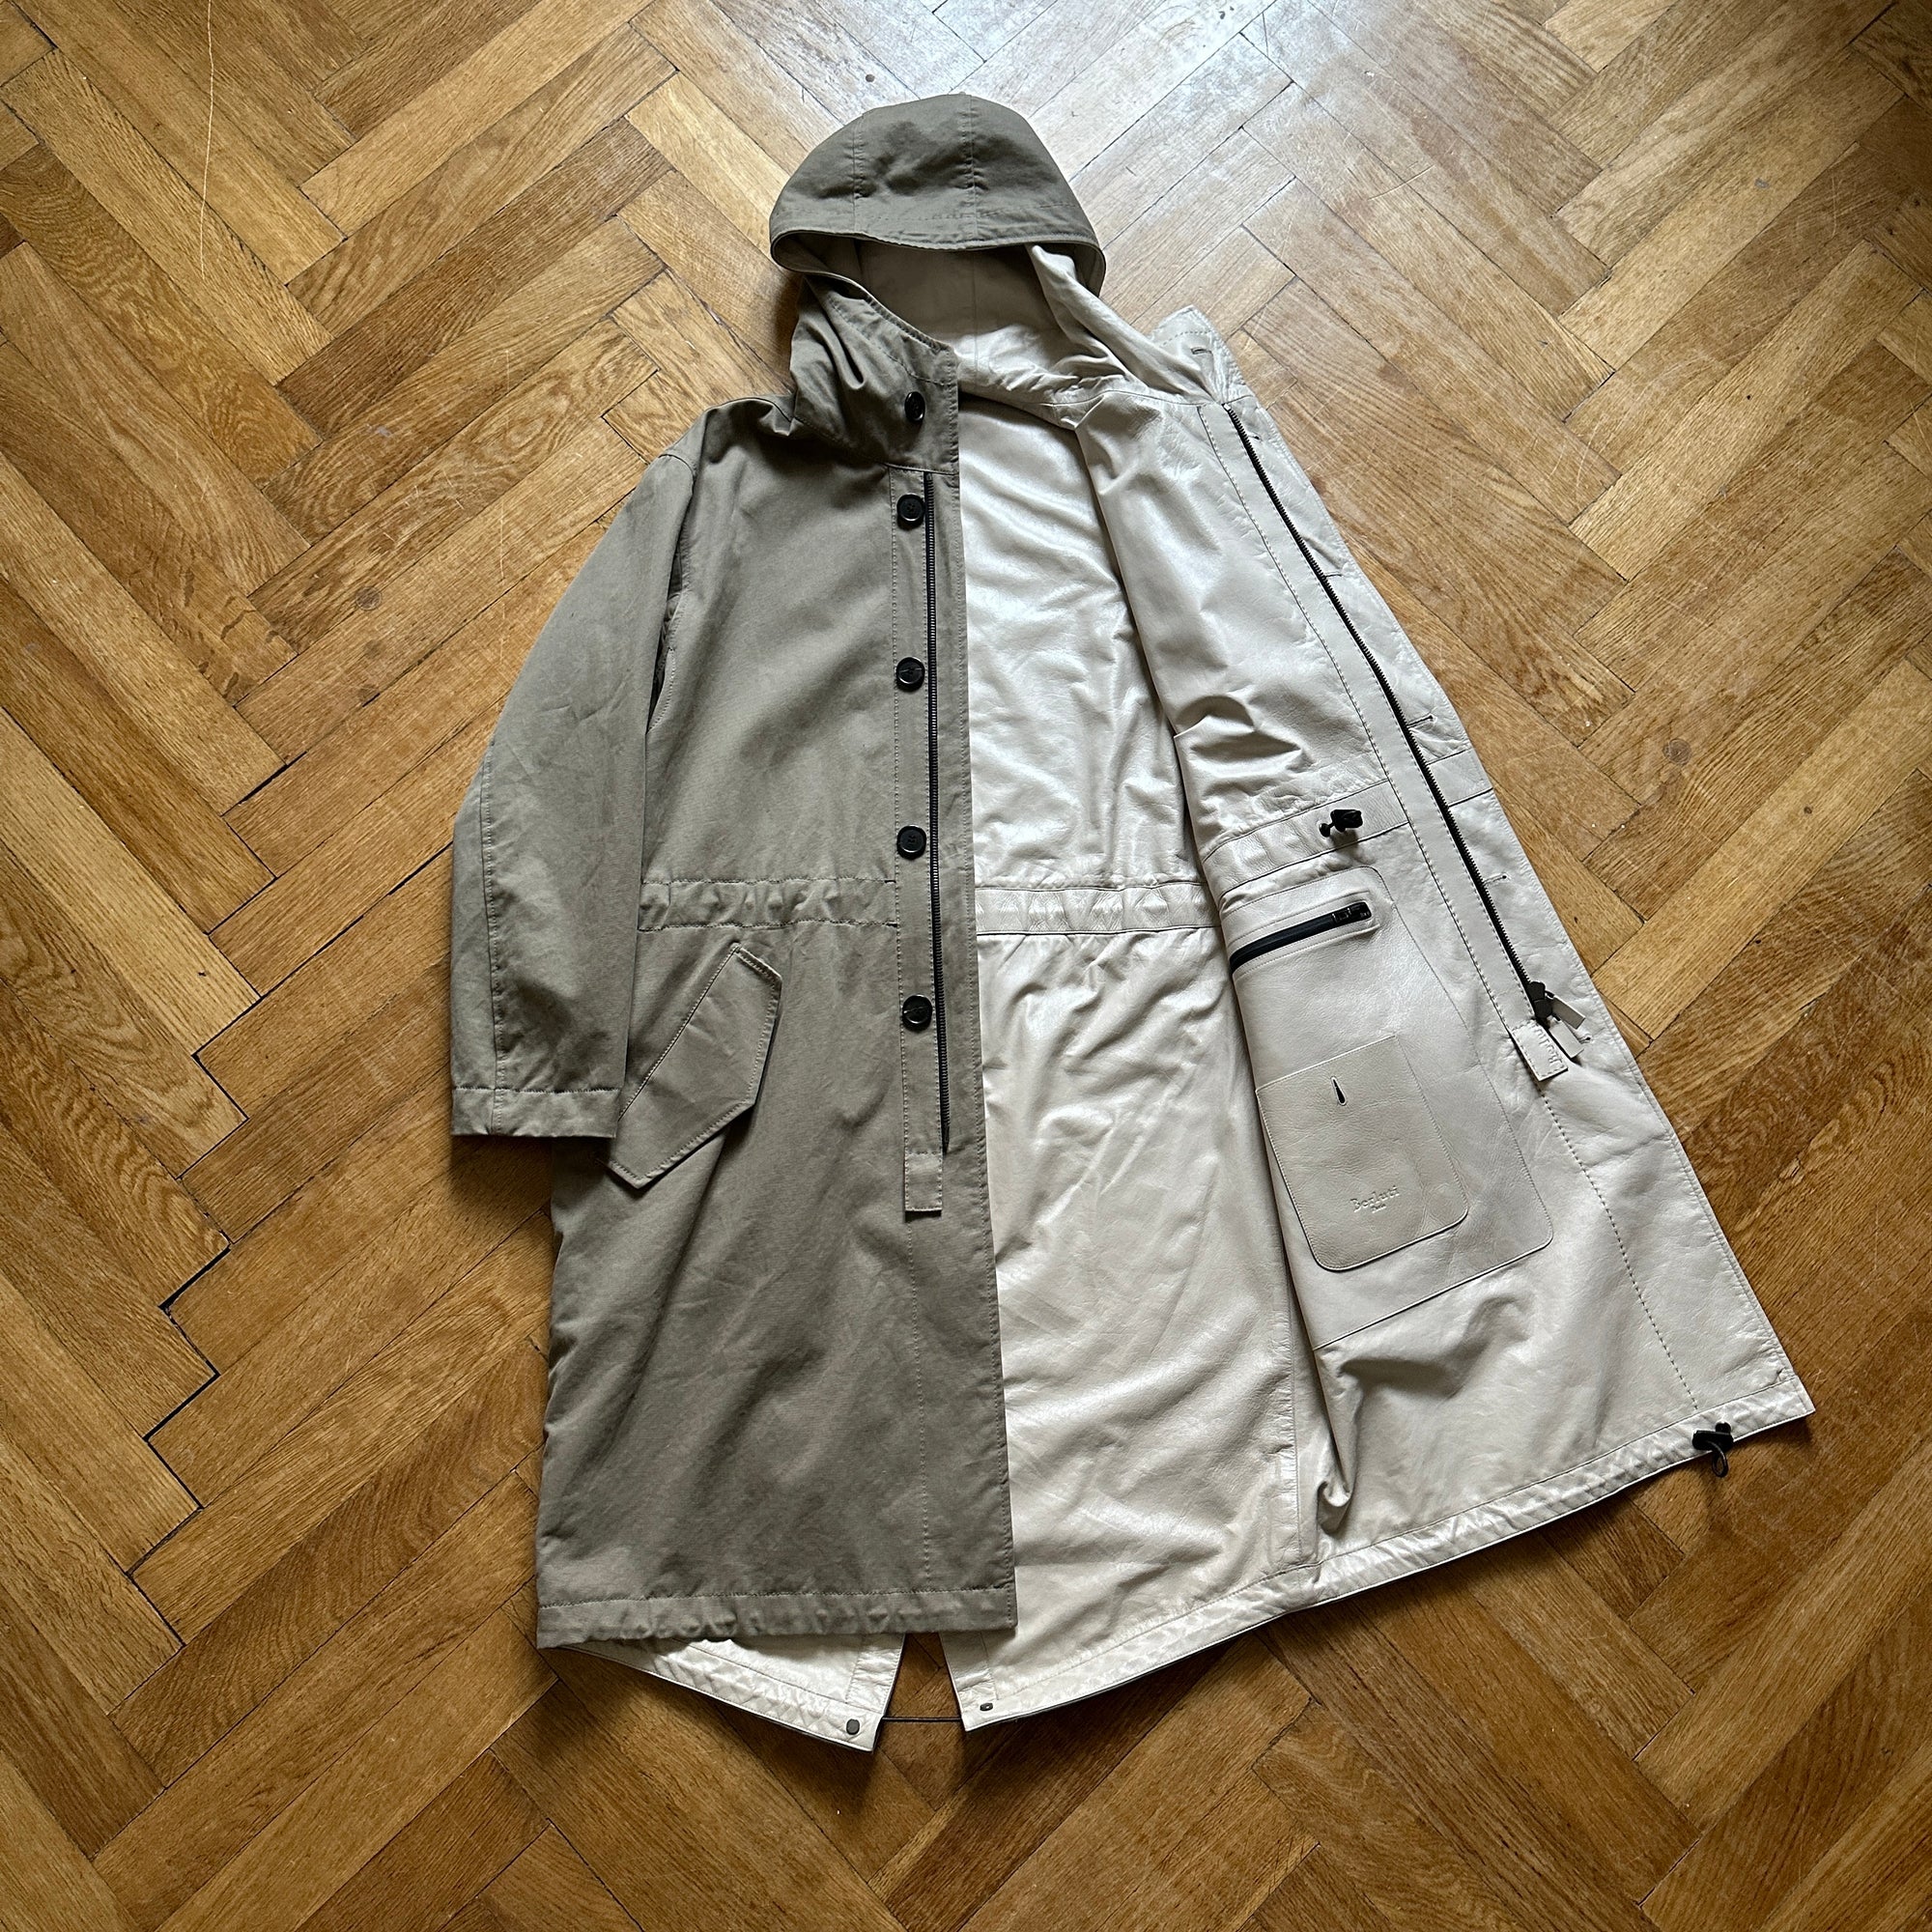 Berluti by Haider Ackermann SS18 Leather Lined Parka Sample